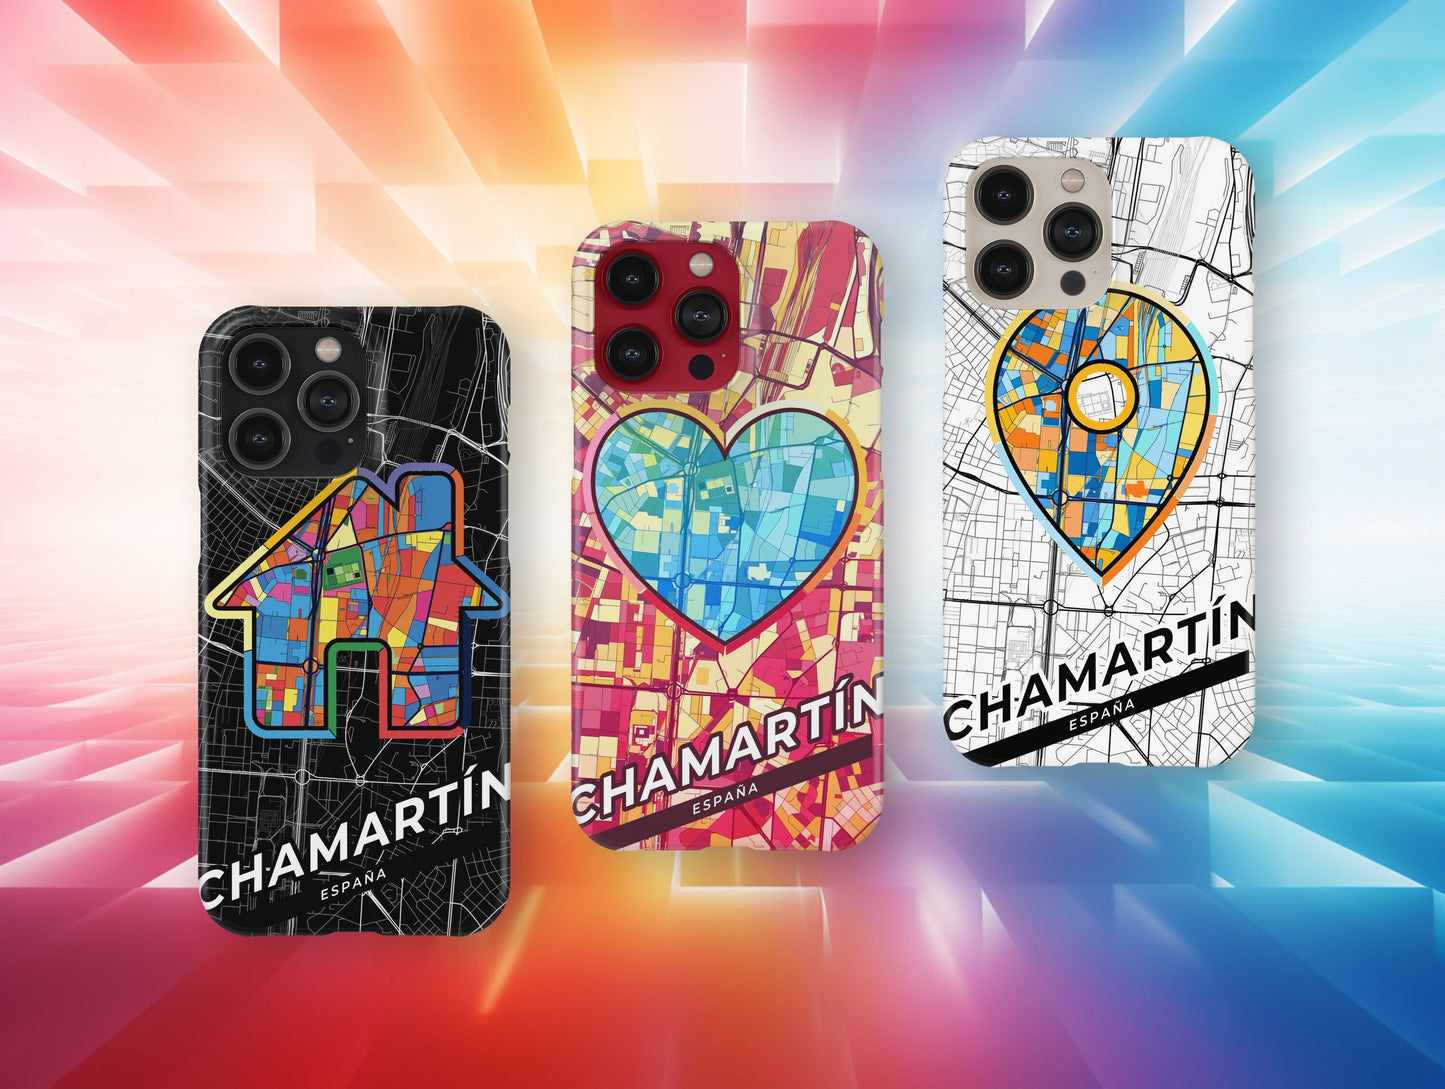 Chamartín Spain slim phone case with colorful icon. Birthday, wedding or housewarming gift. Couple match cases.